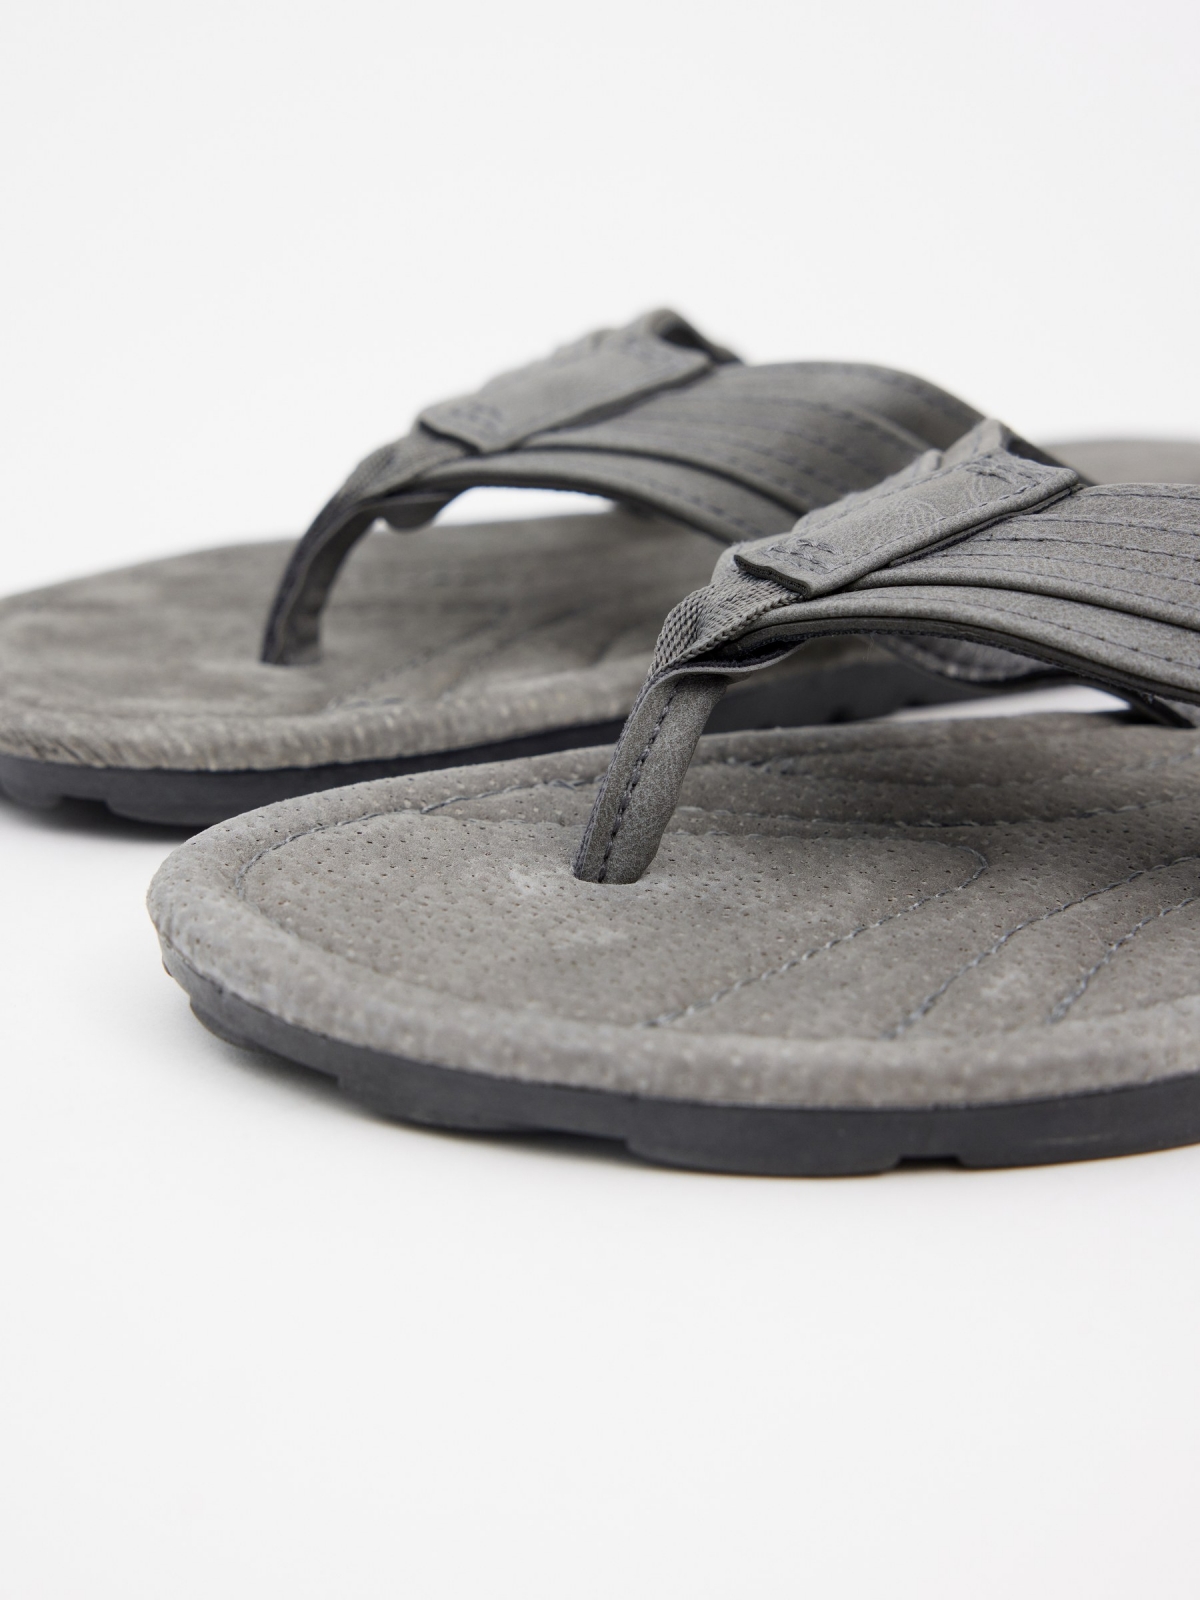 Leather toe sandal grey detail view